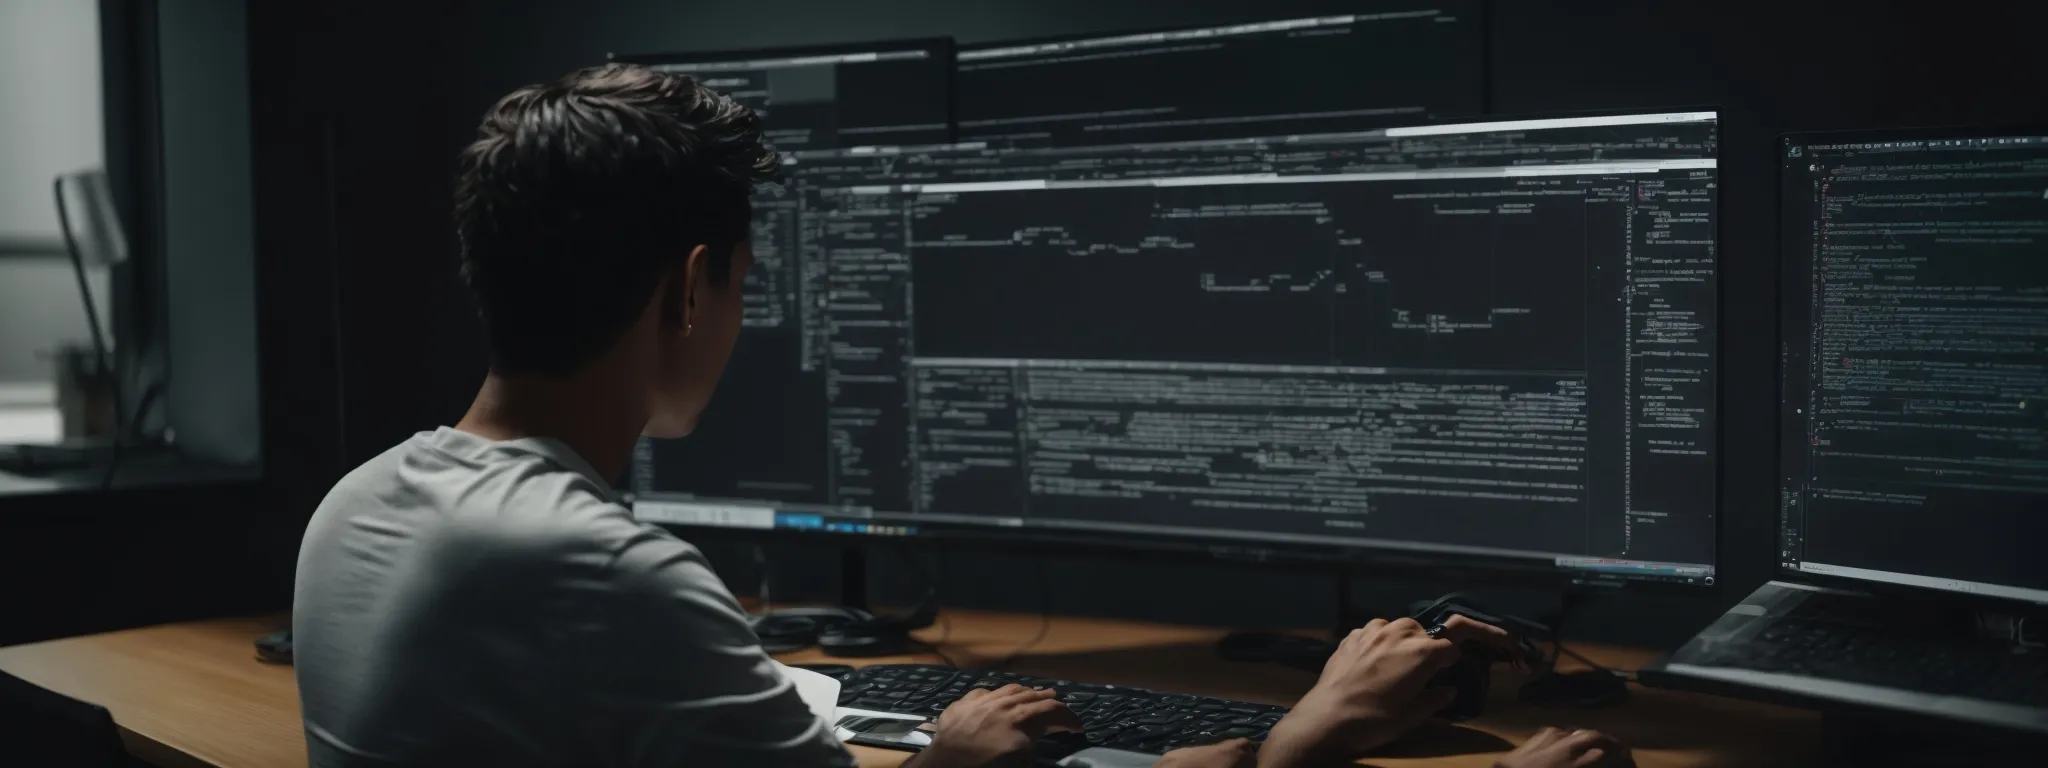 a person sitting at a sleek desk, intently working on a computer with an open code editor and a visible website layout on the screen.